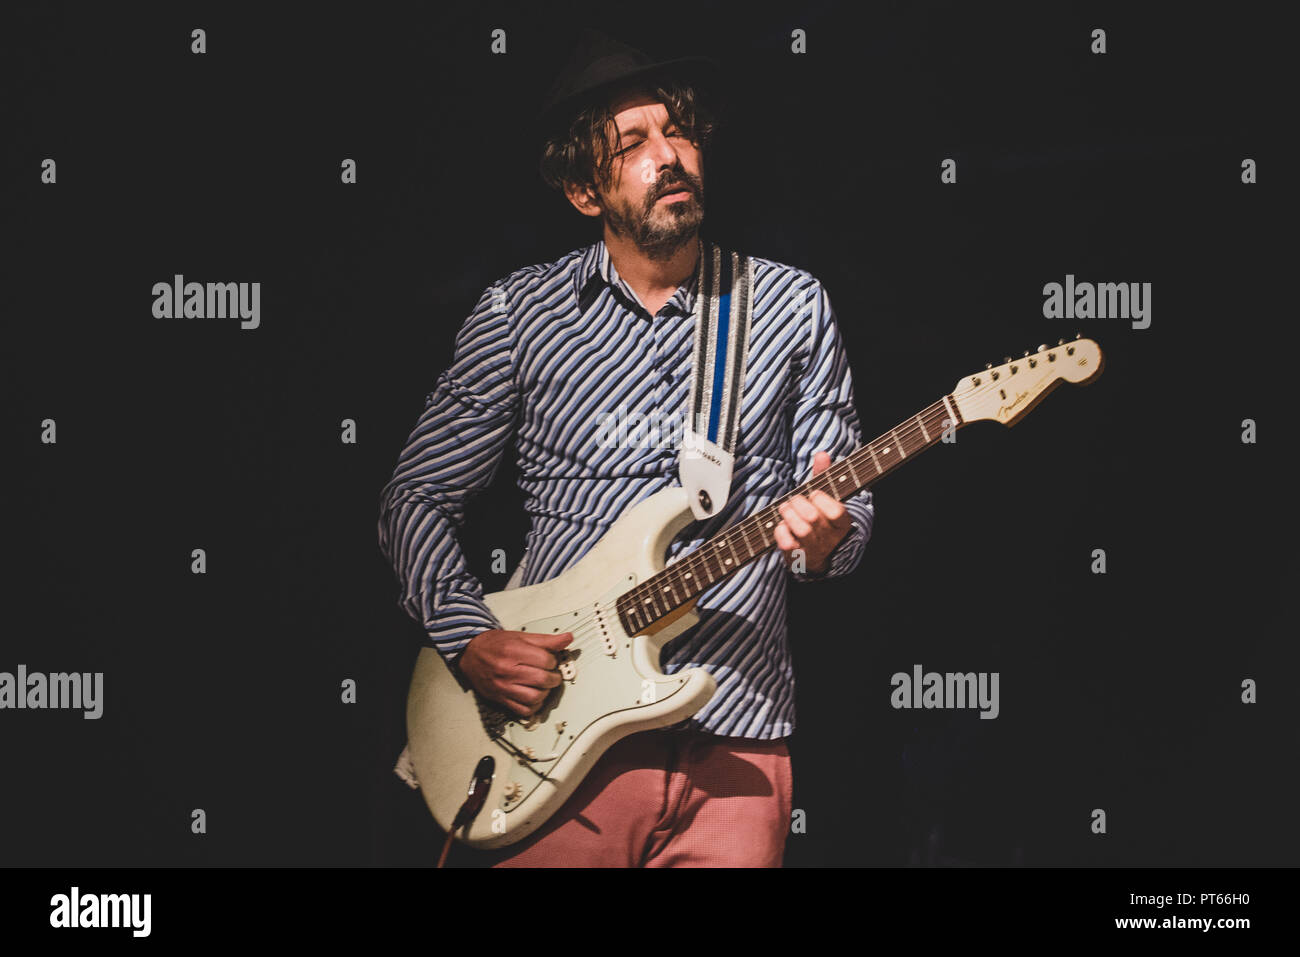 Torino, Italy. 07th Oct, 2018. The Italian guitarist, composer and producer Riccardo Onori, performing live on stage for the first time ever his new album called Sonoristan at the Officine Grandi Riparazioni (OGR) in Turin, opening for the African duo Amadou and Mariam. Credit: Alessandro Bosio/Pacific Press/Alamy Live News Stock Photo